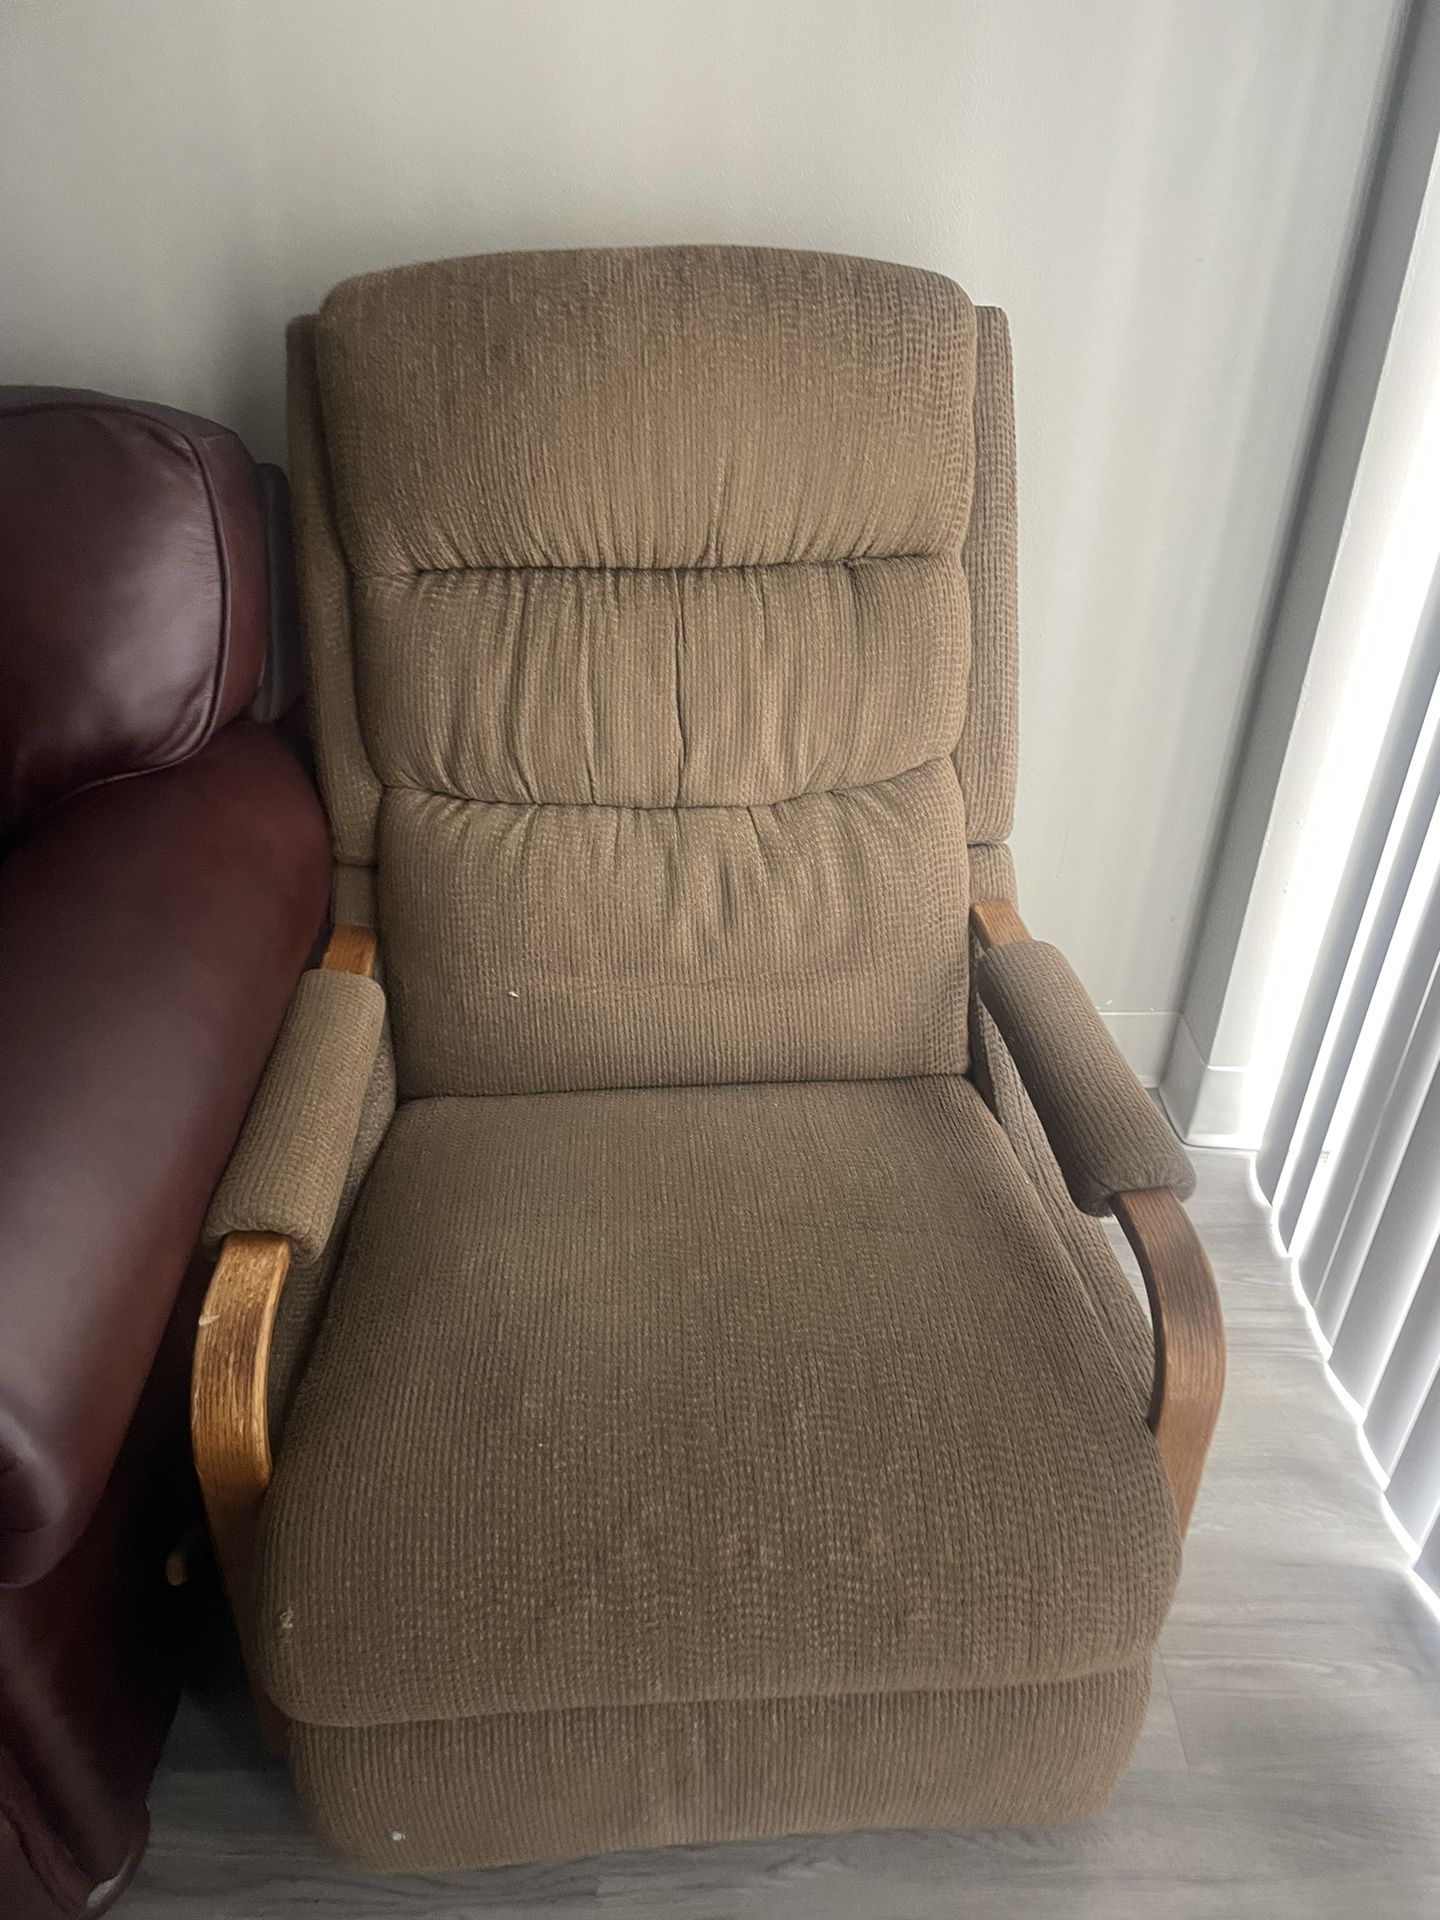 Recliner Chair Used For Sale ! 